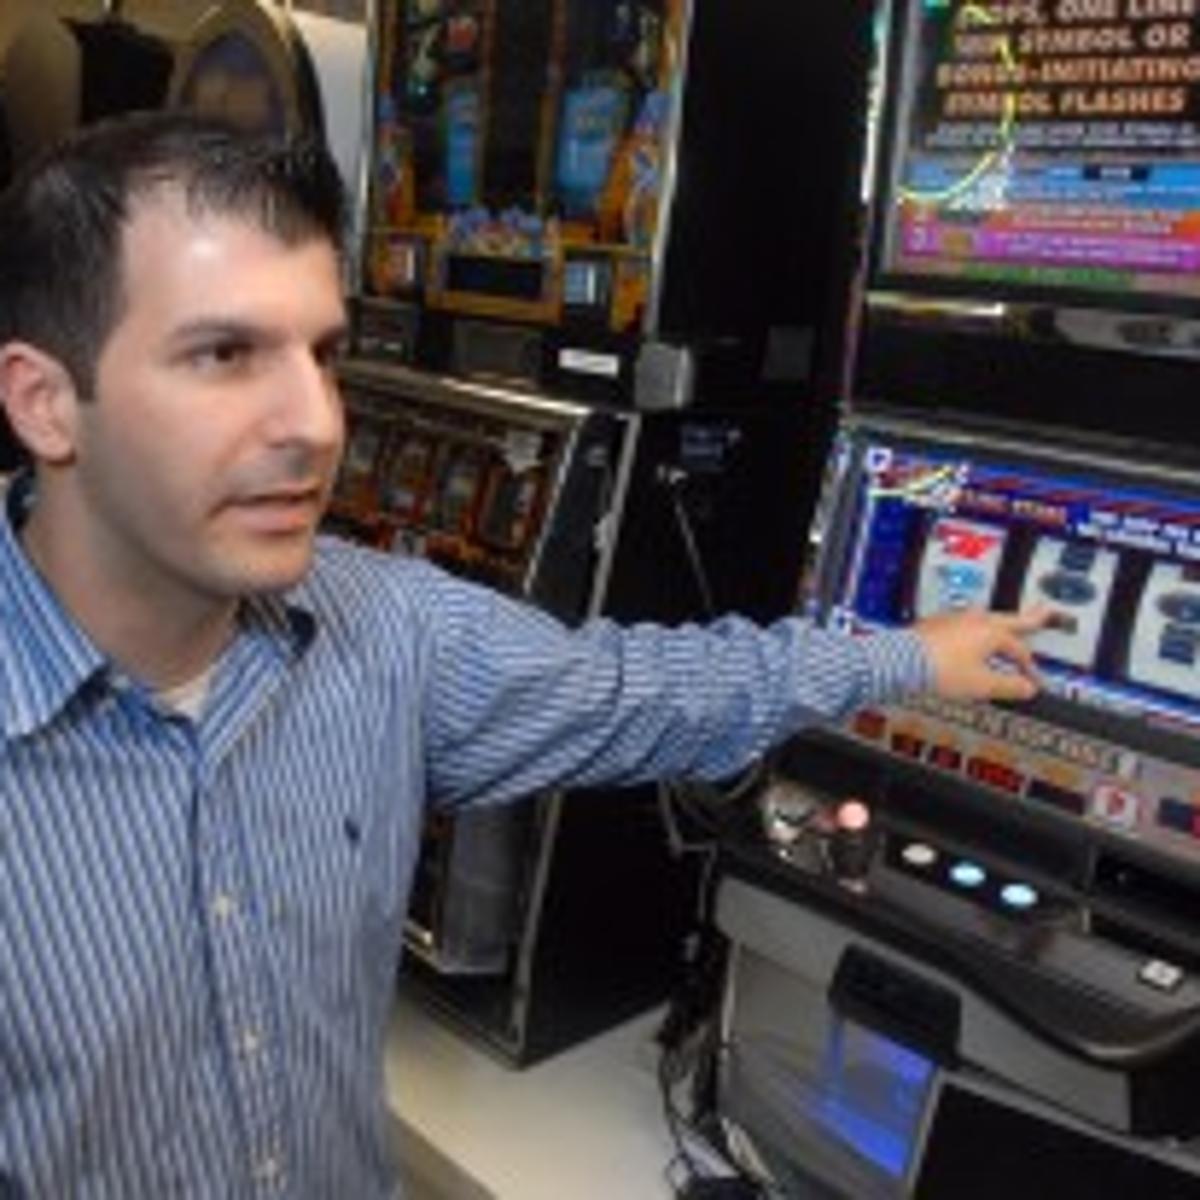 Slots Get Put To The Test More Quickly Now At Division Of Gaming Enforcement S Lab Local News Pressofatlanticcity Com